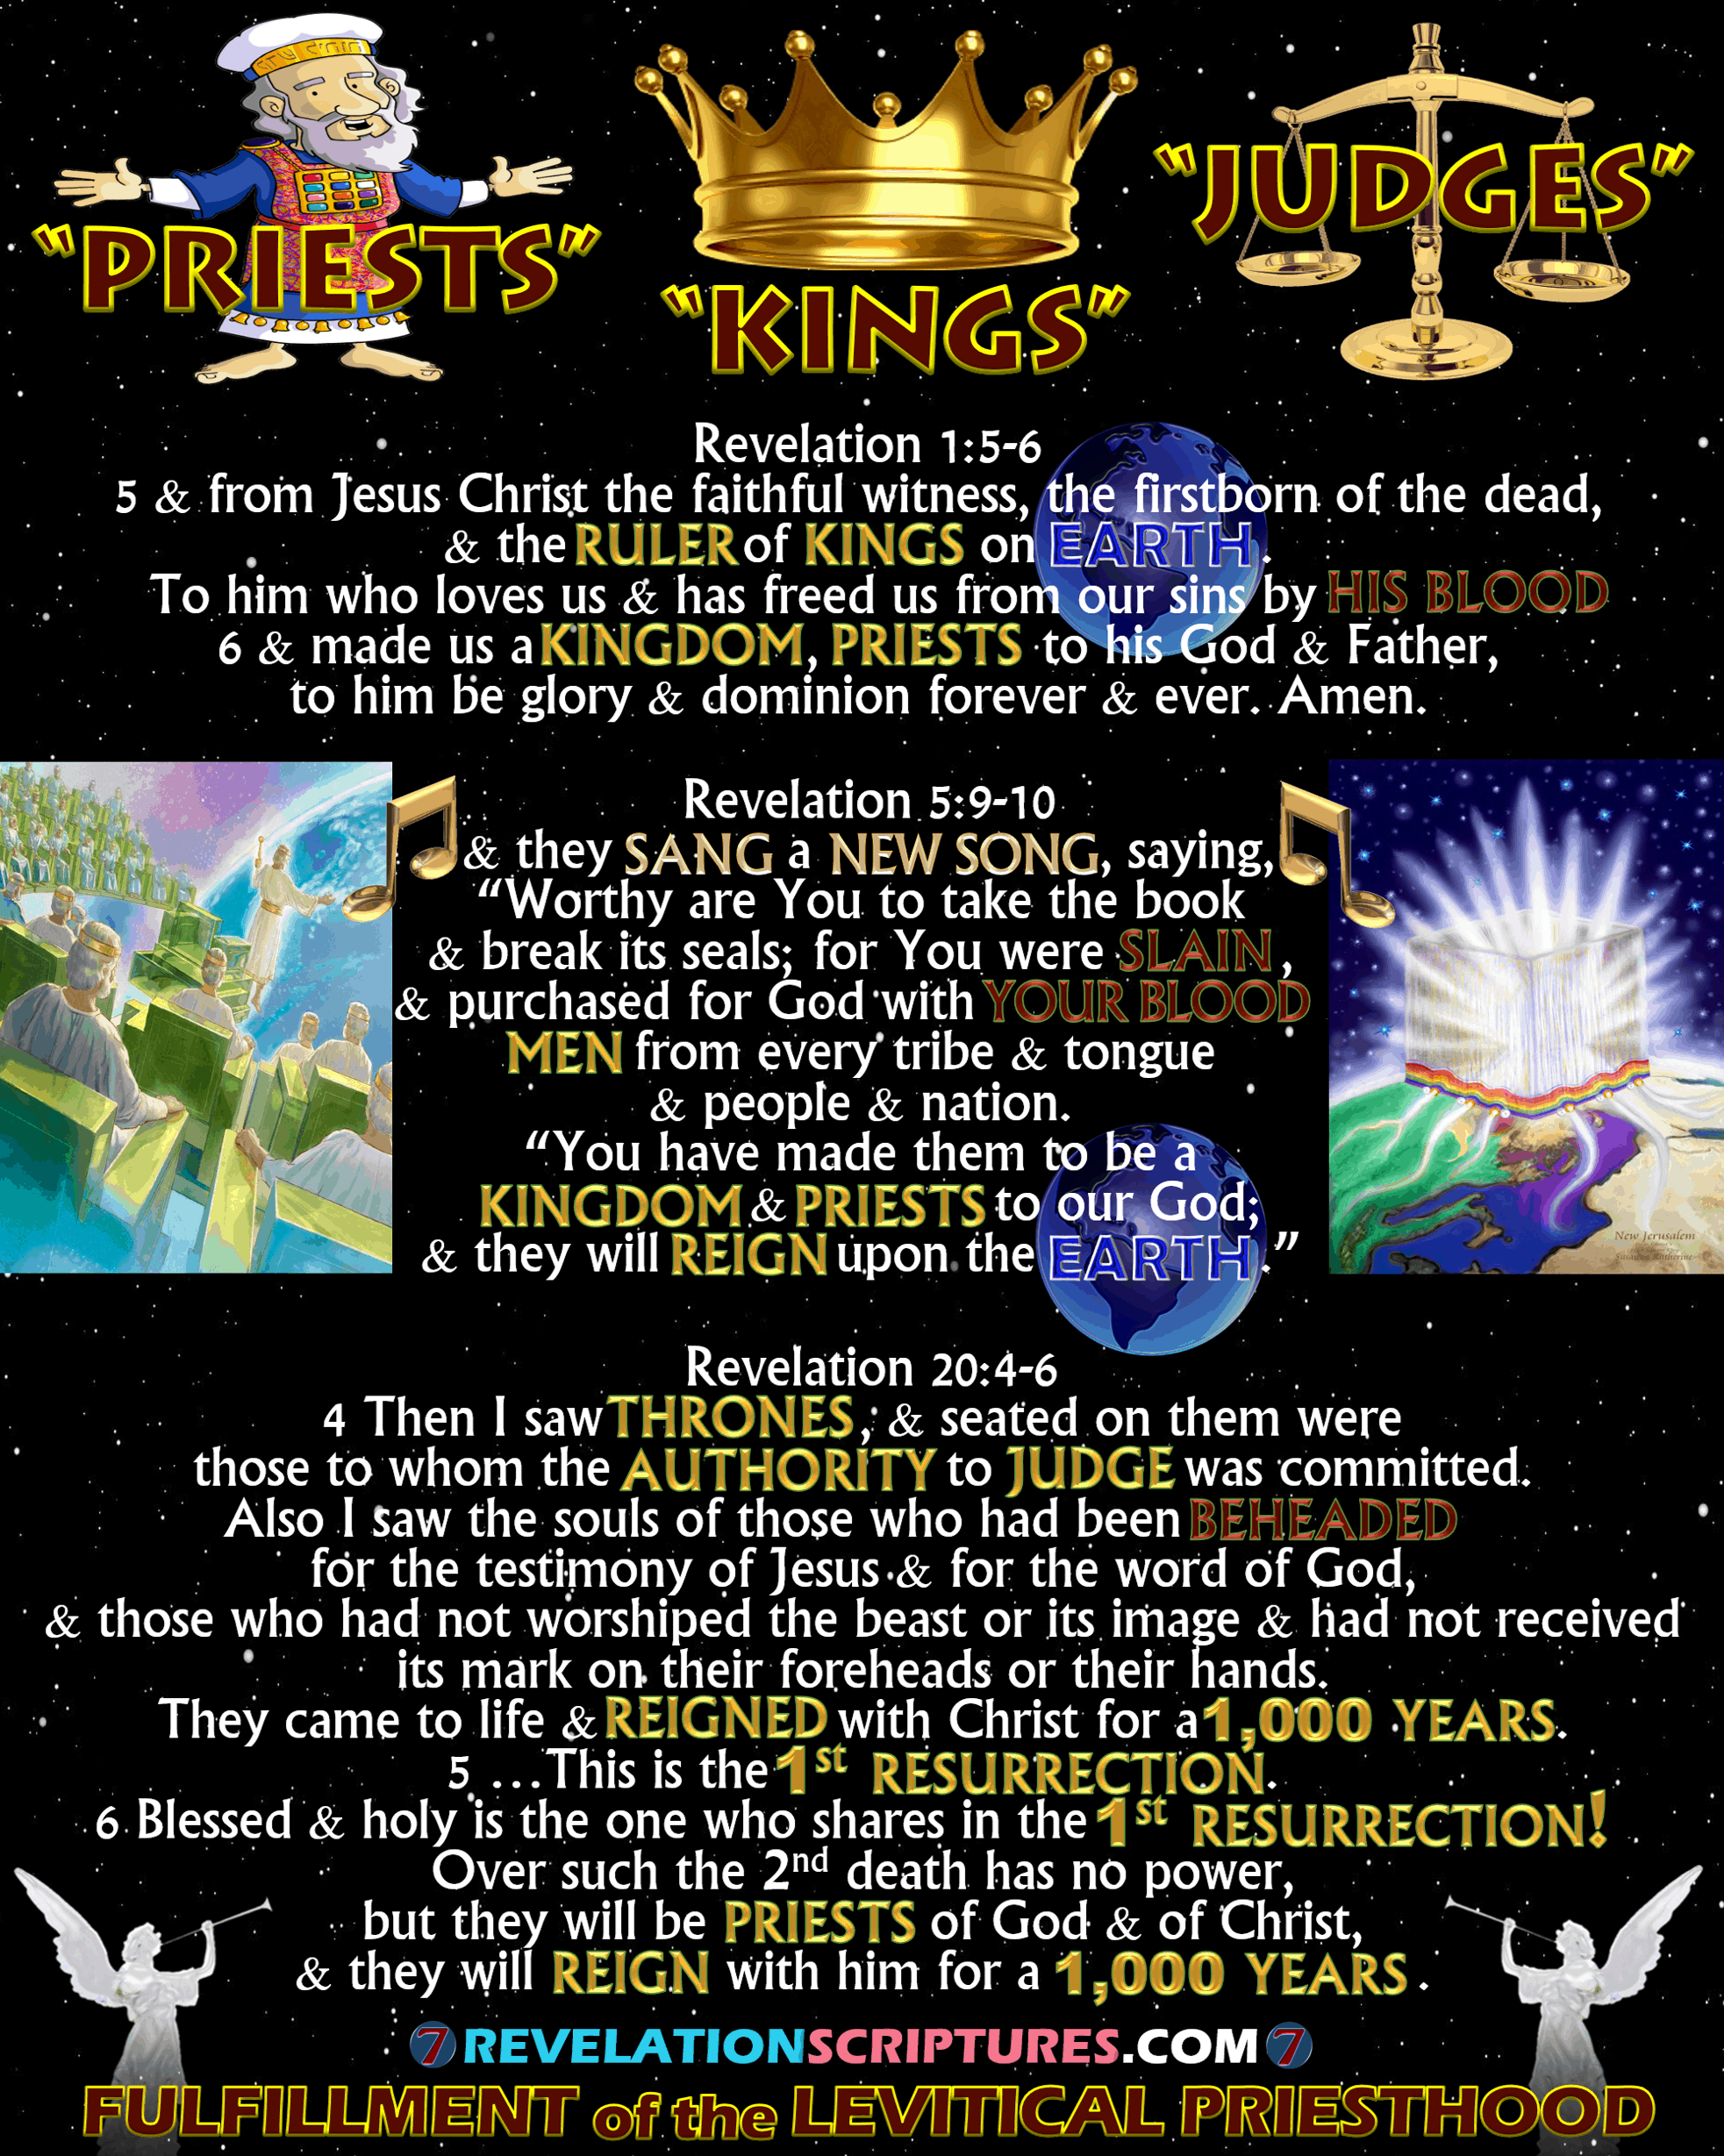 kingdom of Priests,Priests,kings,judges,priest,king,judge,ruler of Kings on earth,revelation 1:5,Revelation 1:6,kingdom,priests to God,sang,new song,blood,slain,reign on the earth,thrones,authority to judge,earth,beheaded,beast,image mark,1000 years,thousand years,1st resurrection,first resurrection,2nd death second death,priests of God & Christ,fulfillment of levitical priesthood,levy priests,royal priesthood,zion,bride of christ,bride,marriage of the lamb,saints,elect,holy ones,spiritual jerusalem,jerusalem above,new Jerusalem,144000